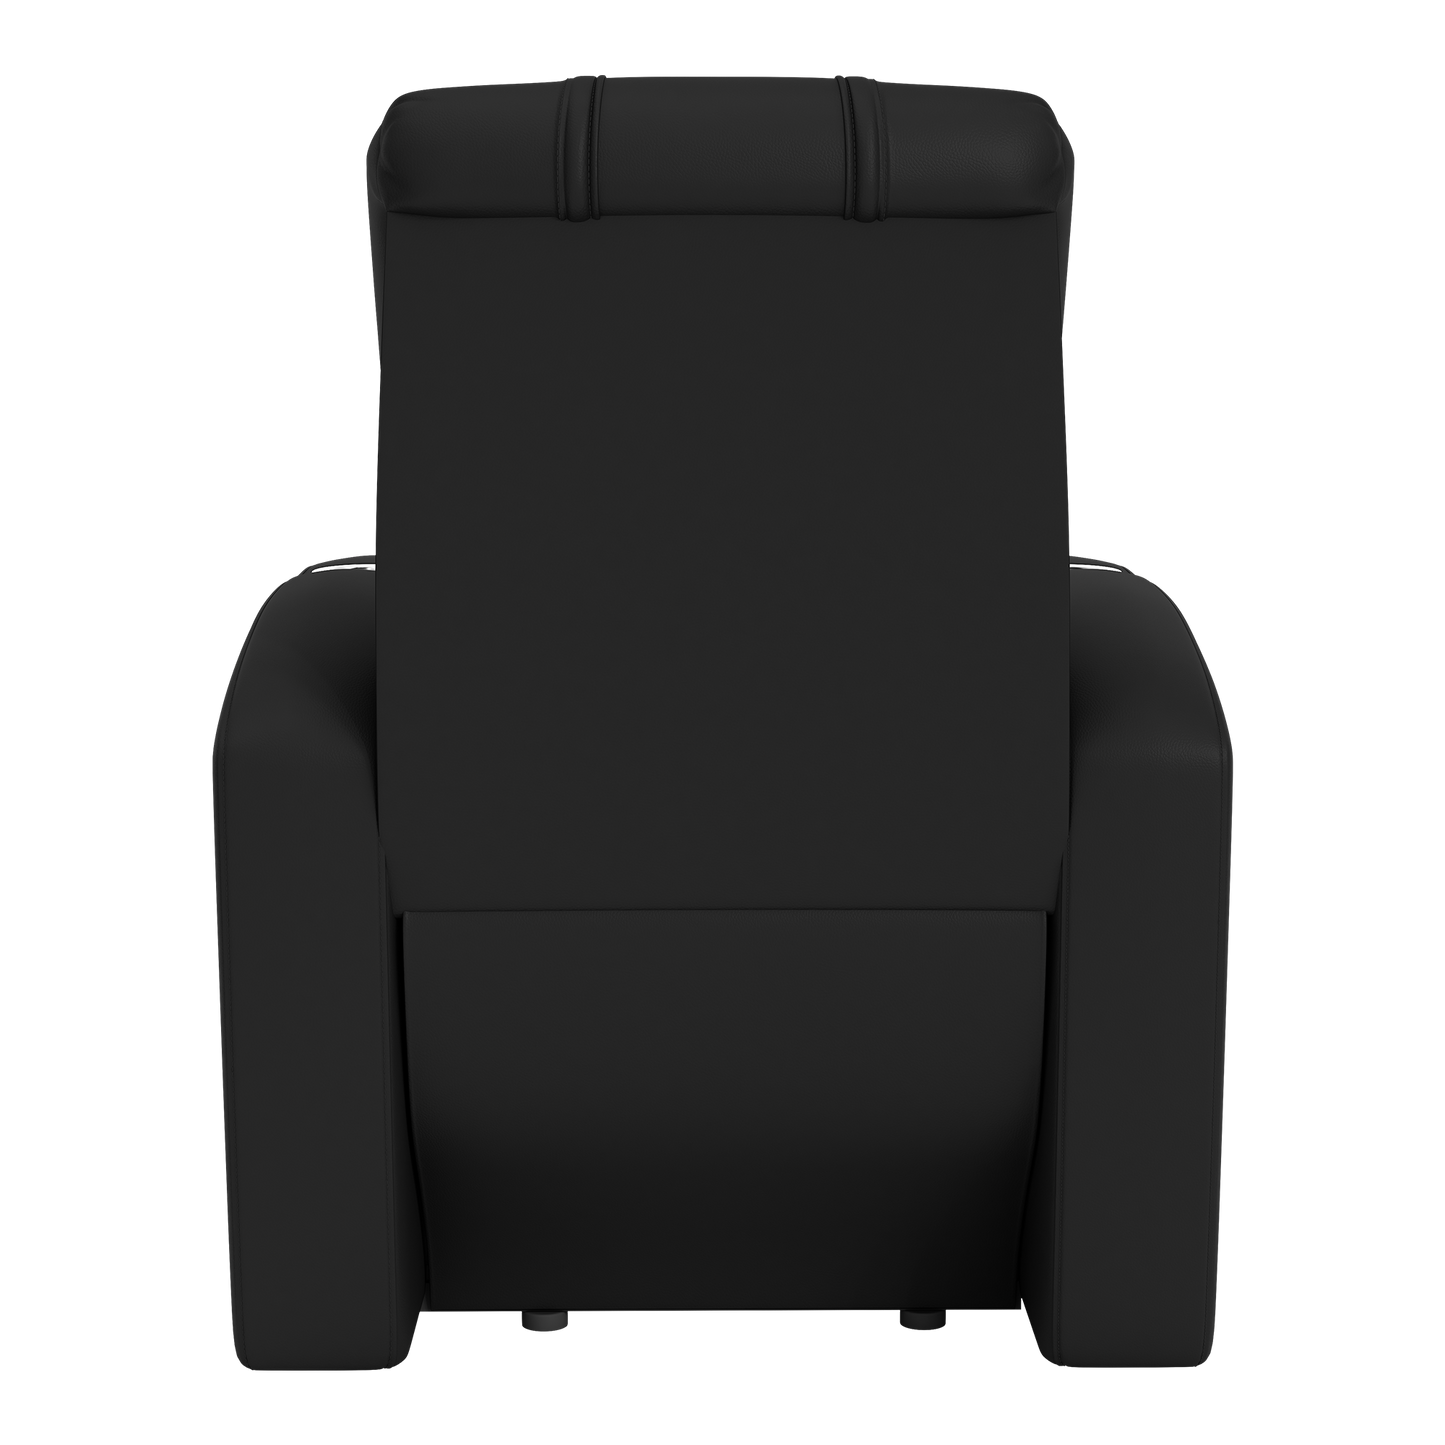 Stealth Recliner with 8oki Primary Logo